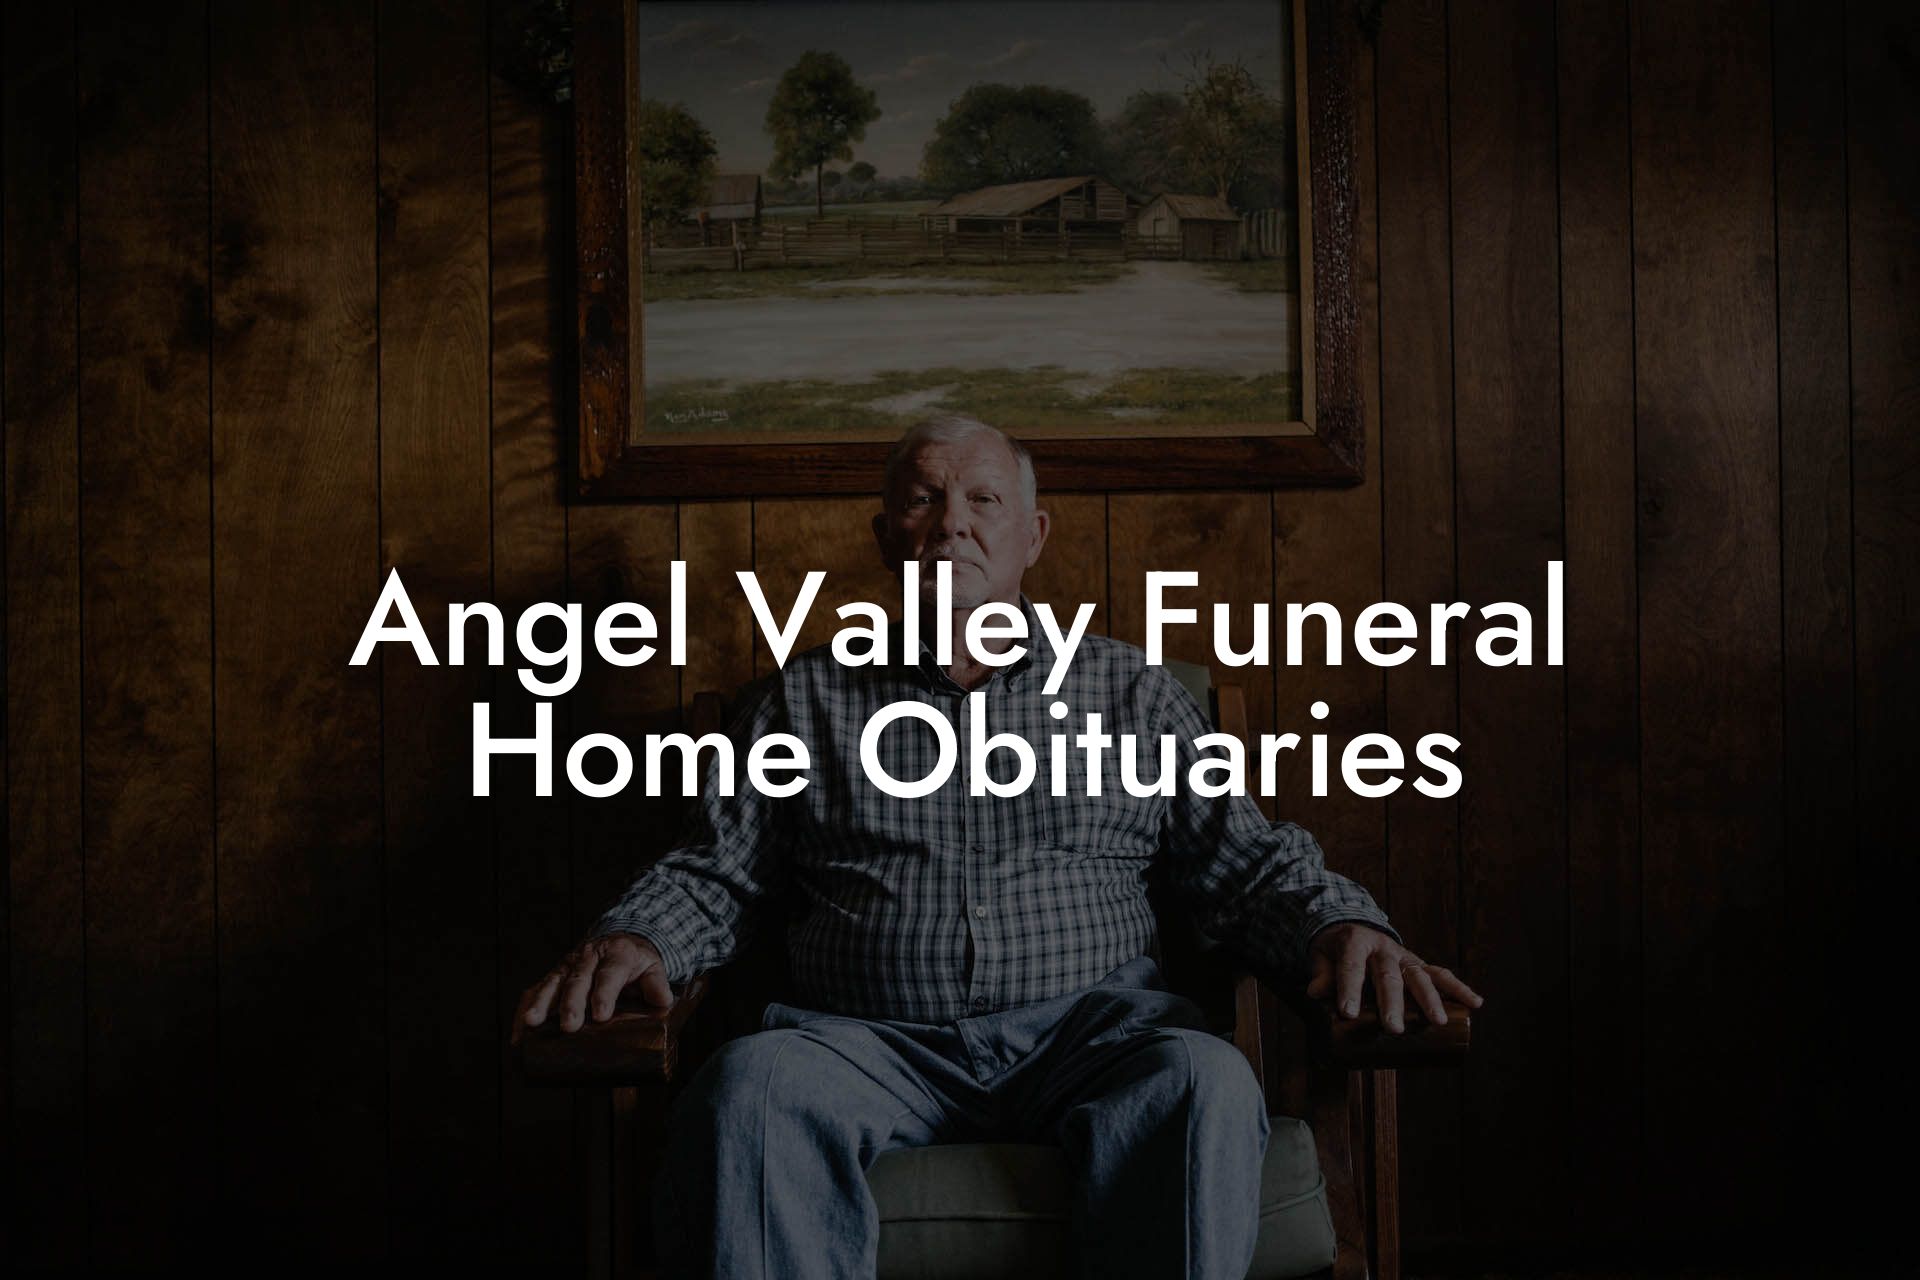 Angel Valley Funeral Home Obituaries